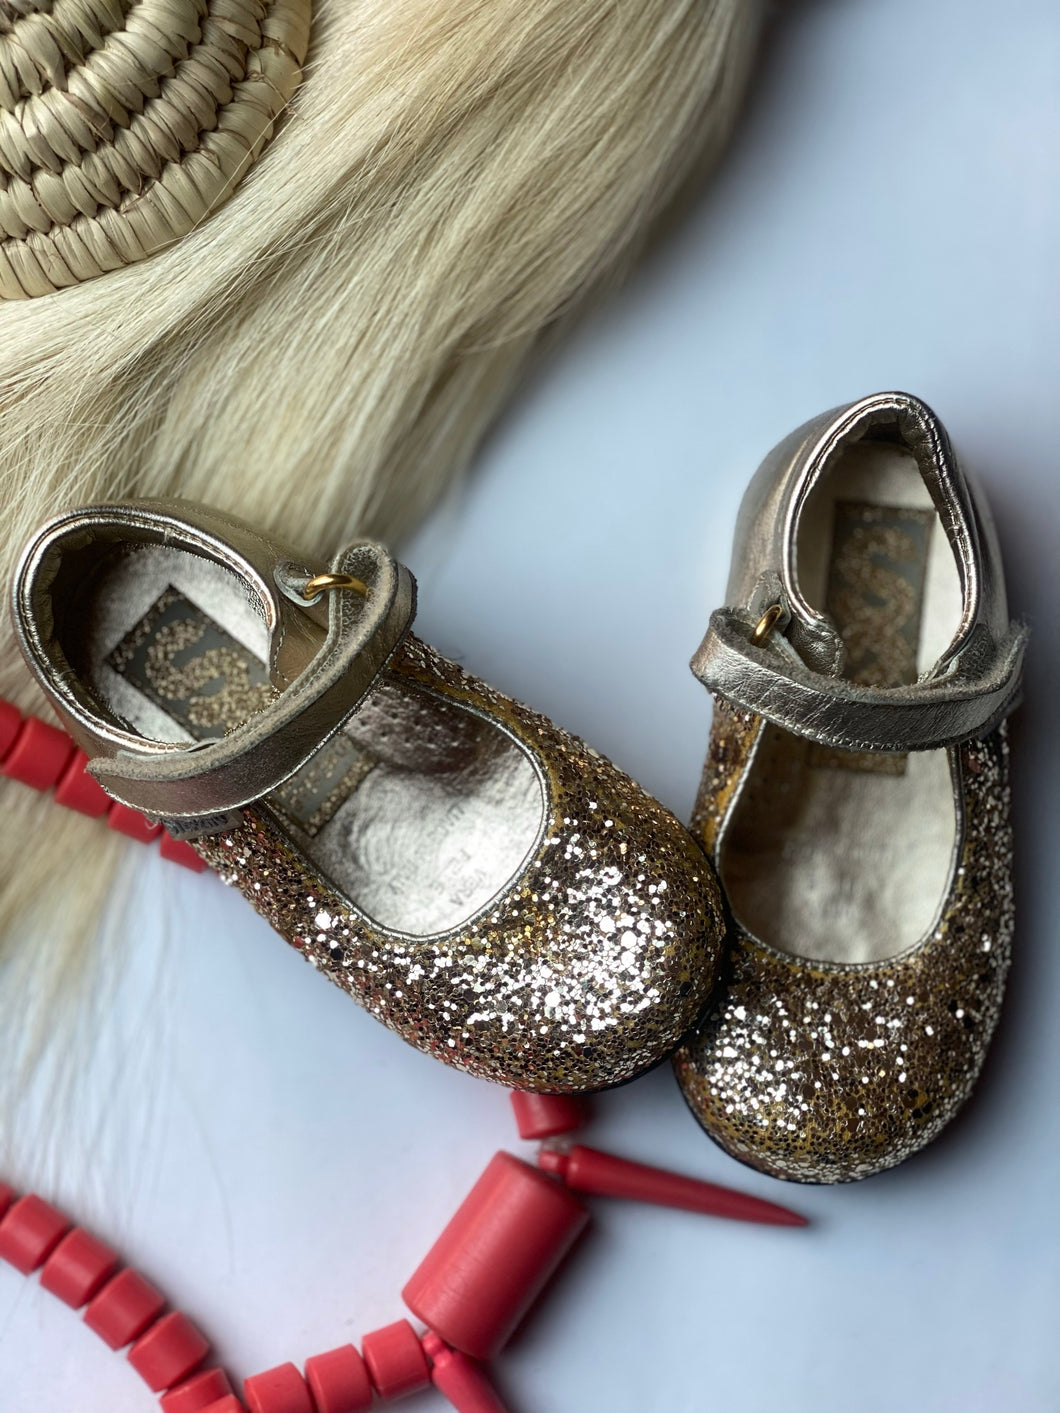 Beautiful gold glitter dressy shoes - Girl's size for 1 to 2 years olds 6UK/23 EU